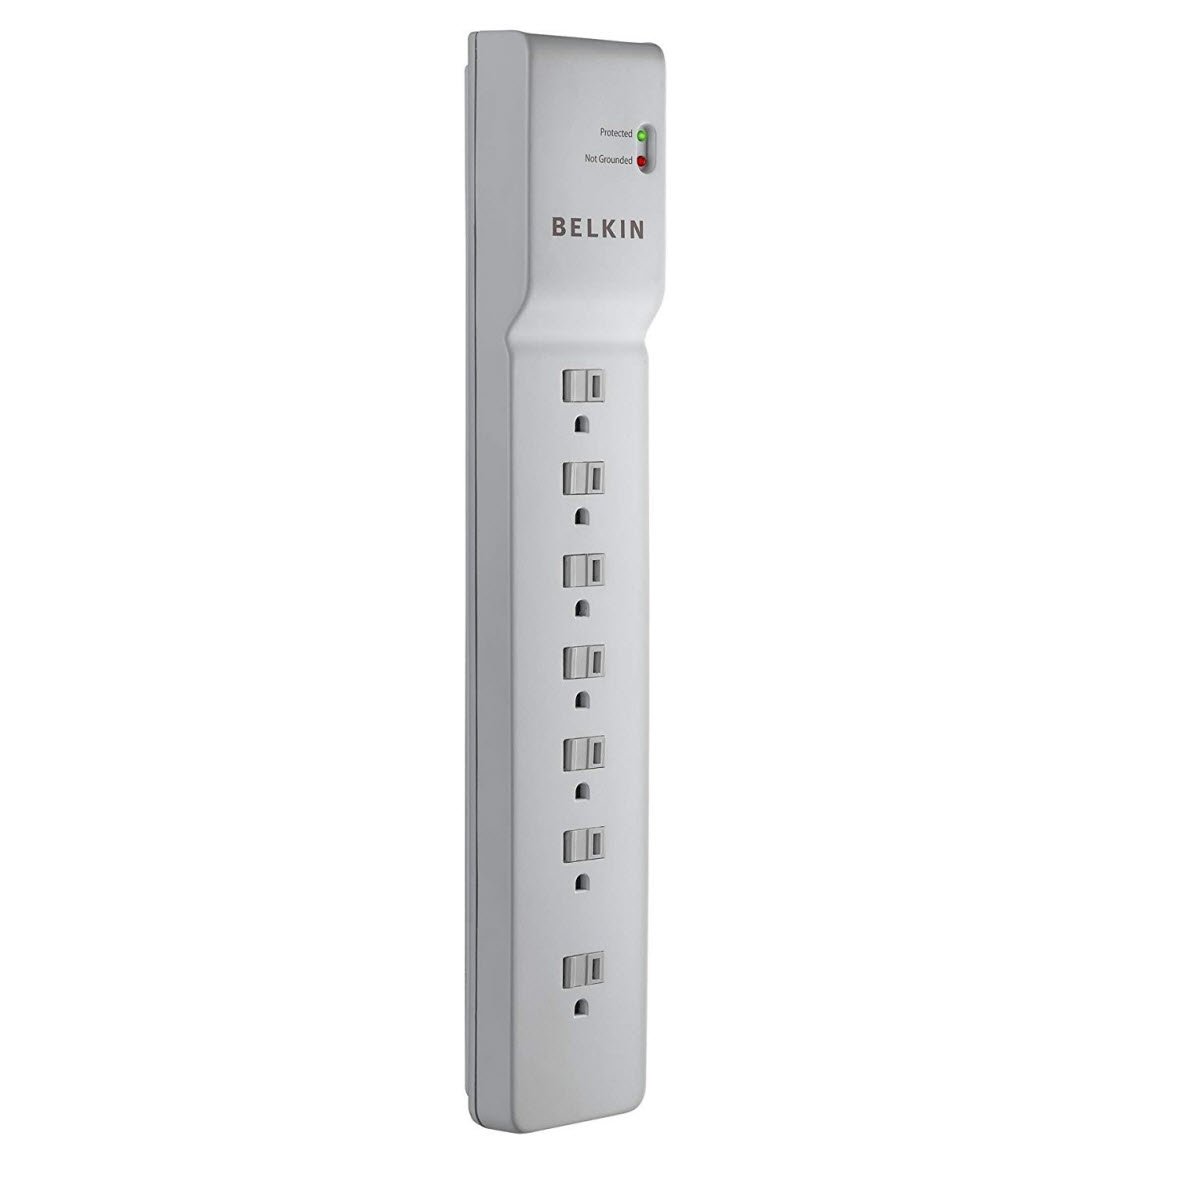 Belkin 7-Outlet Commercial Power Strip Surge Protector with 6-Foot Power Cord, 750 Joules